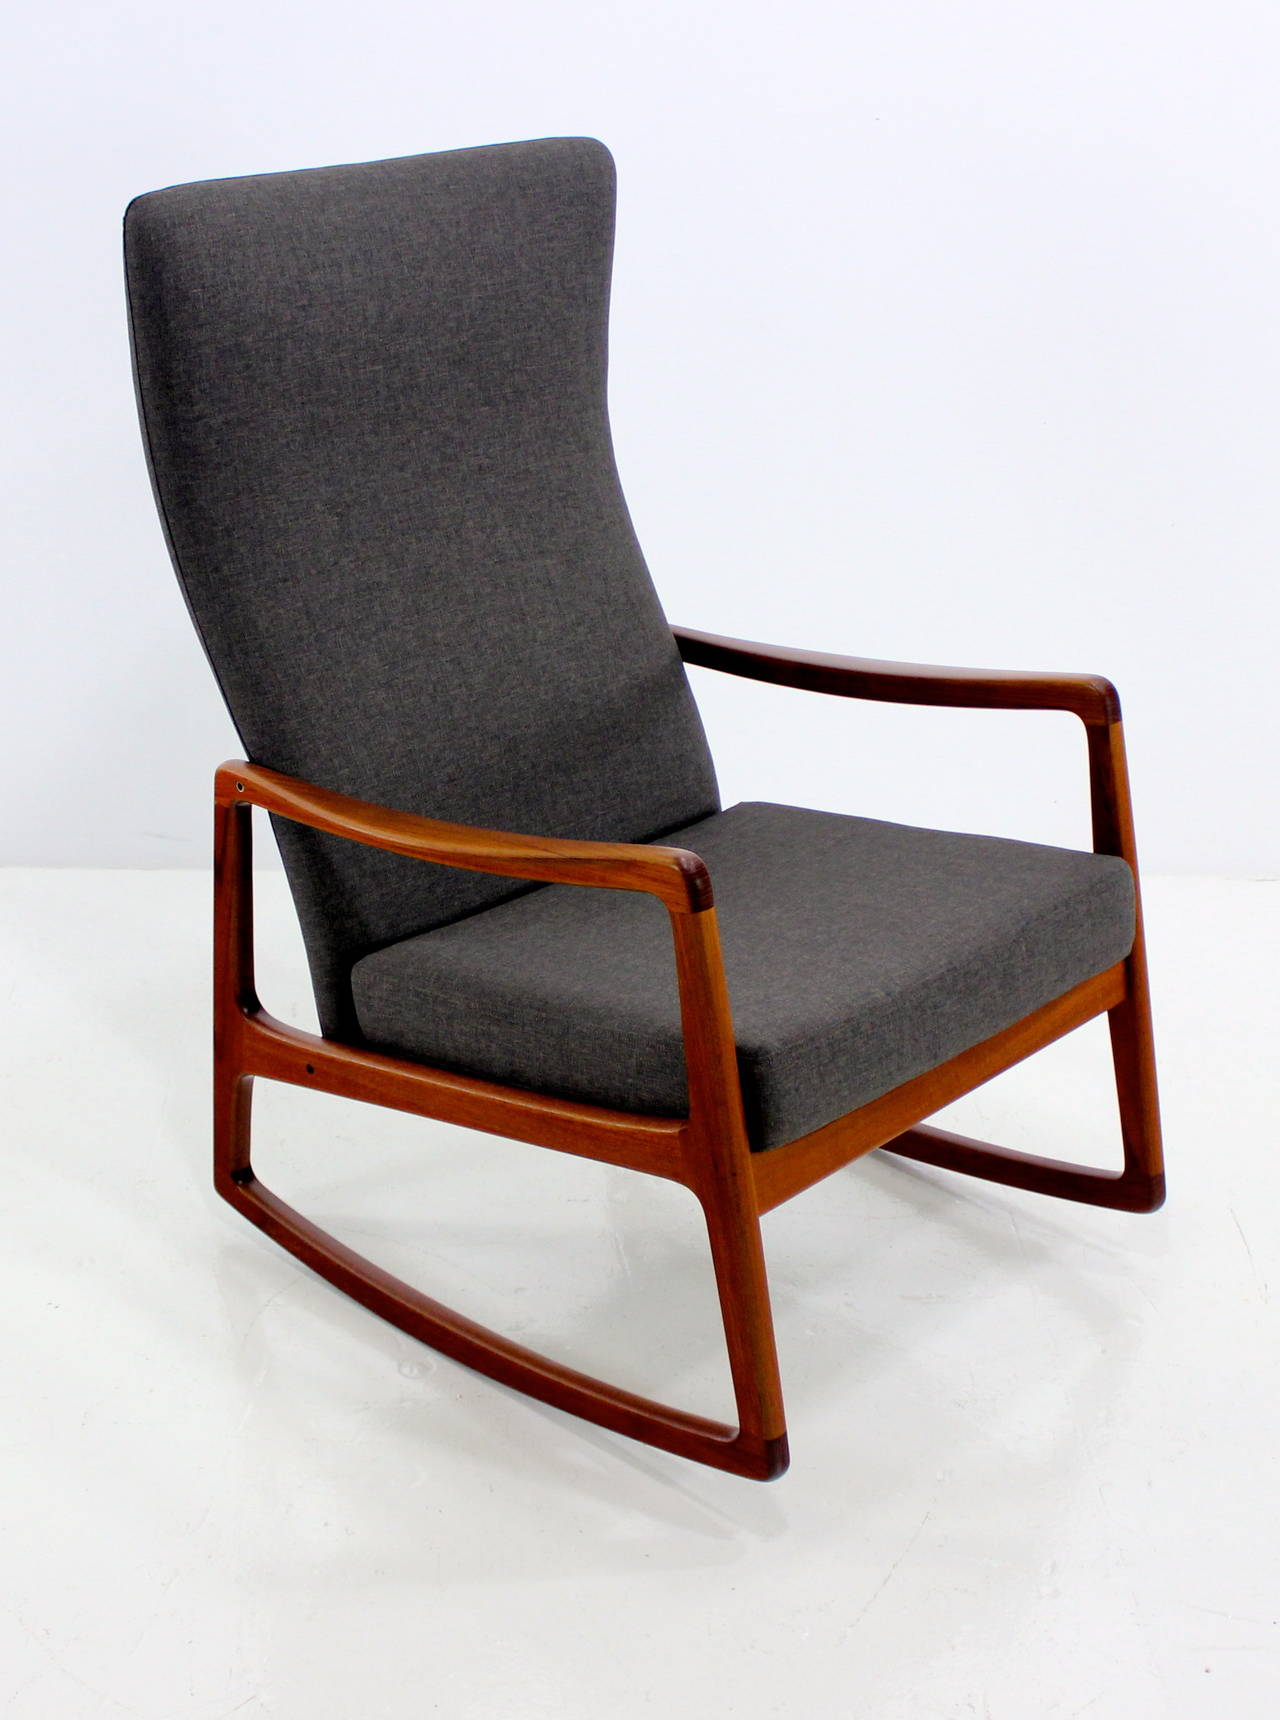 Extraordinary Danish modern rocking chair designed by Ole Wanscher.
Rare high back model.
Teak frame, impeccably upholstered in highest quality period fabric.
Professionally restored and refinished by LookModern.
Matchless quality and